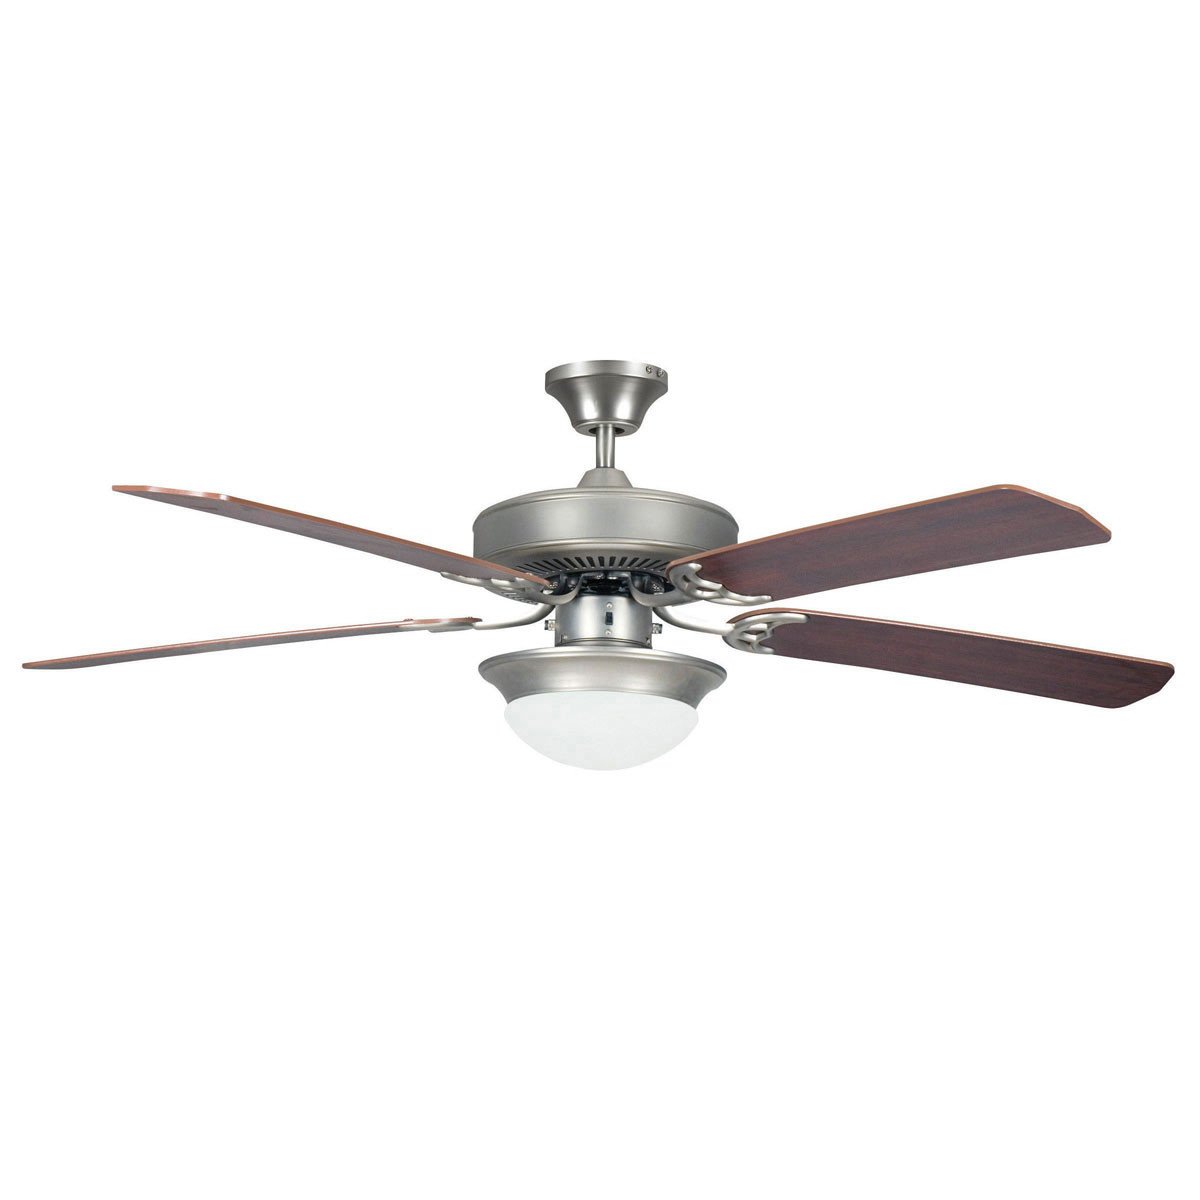 Concord Fans 52" Modern Energy Saver Satin Nickel Ceiling Fan with Light